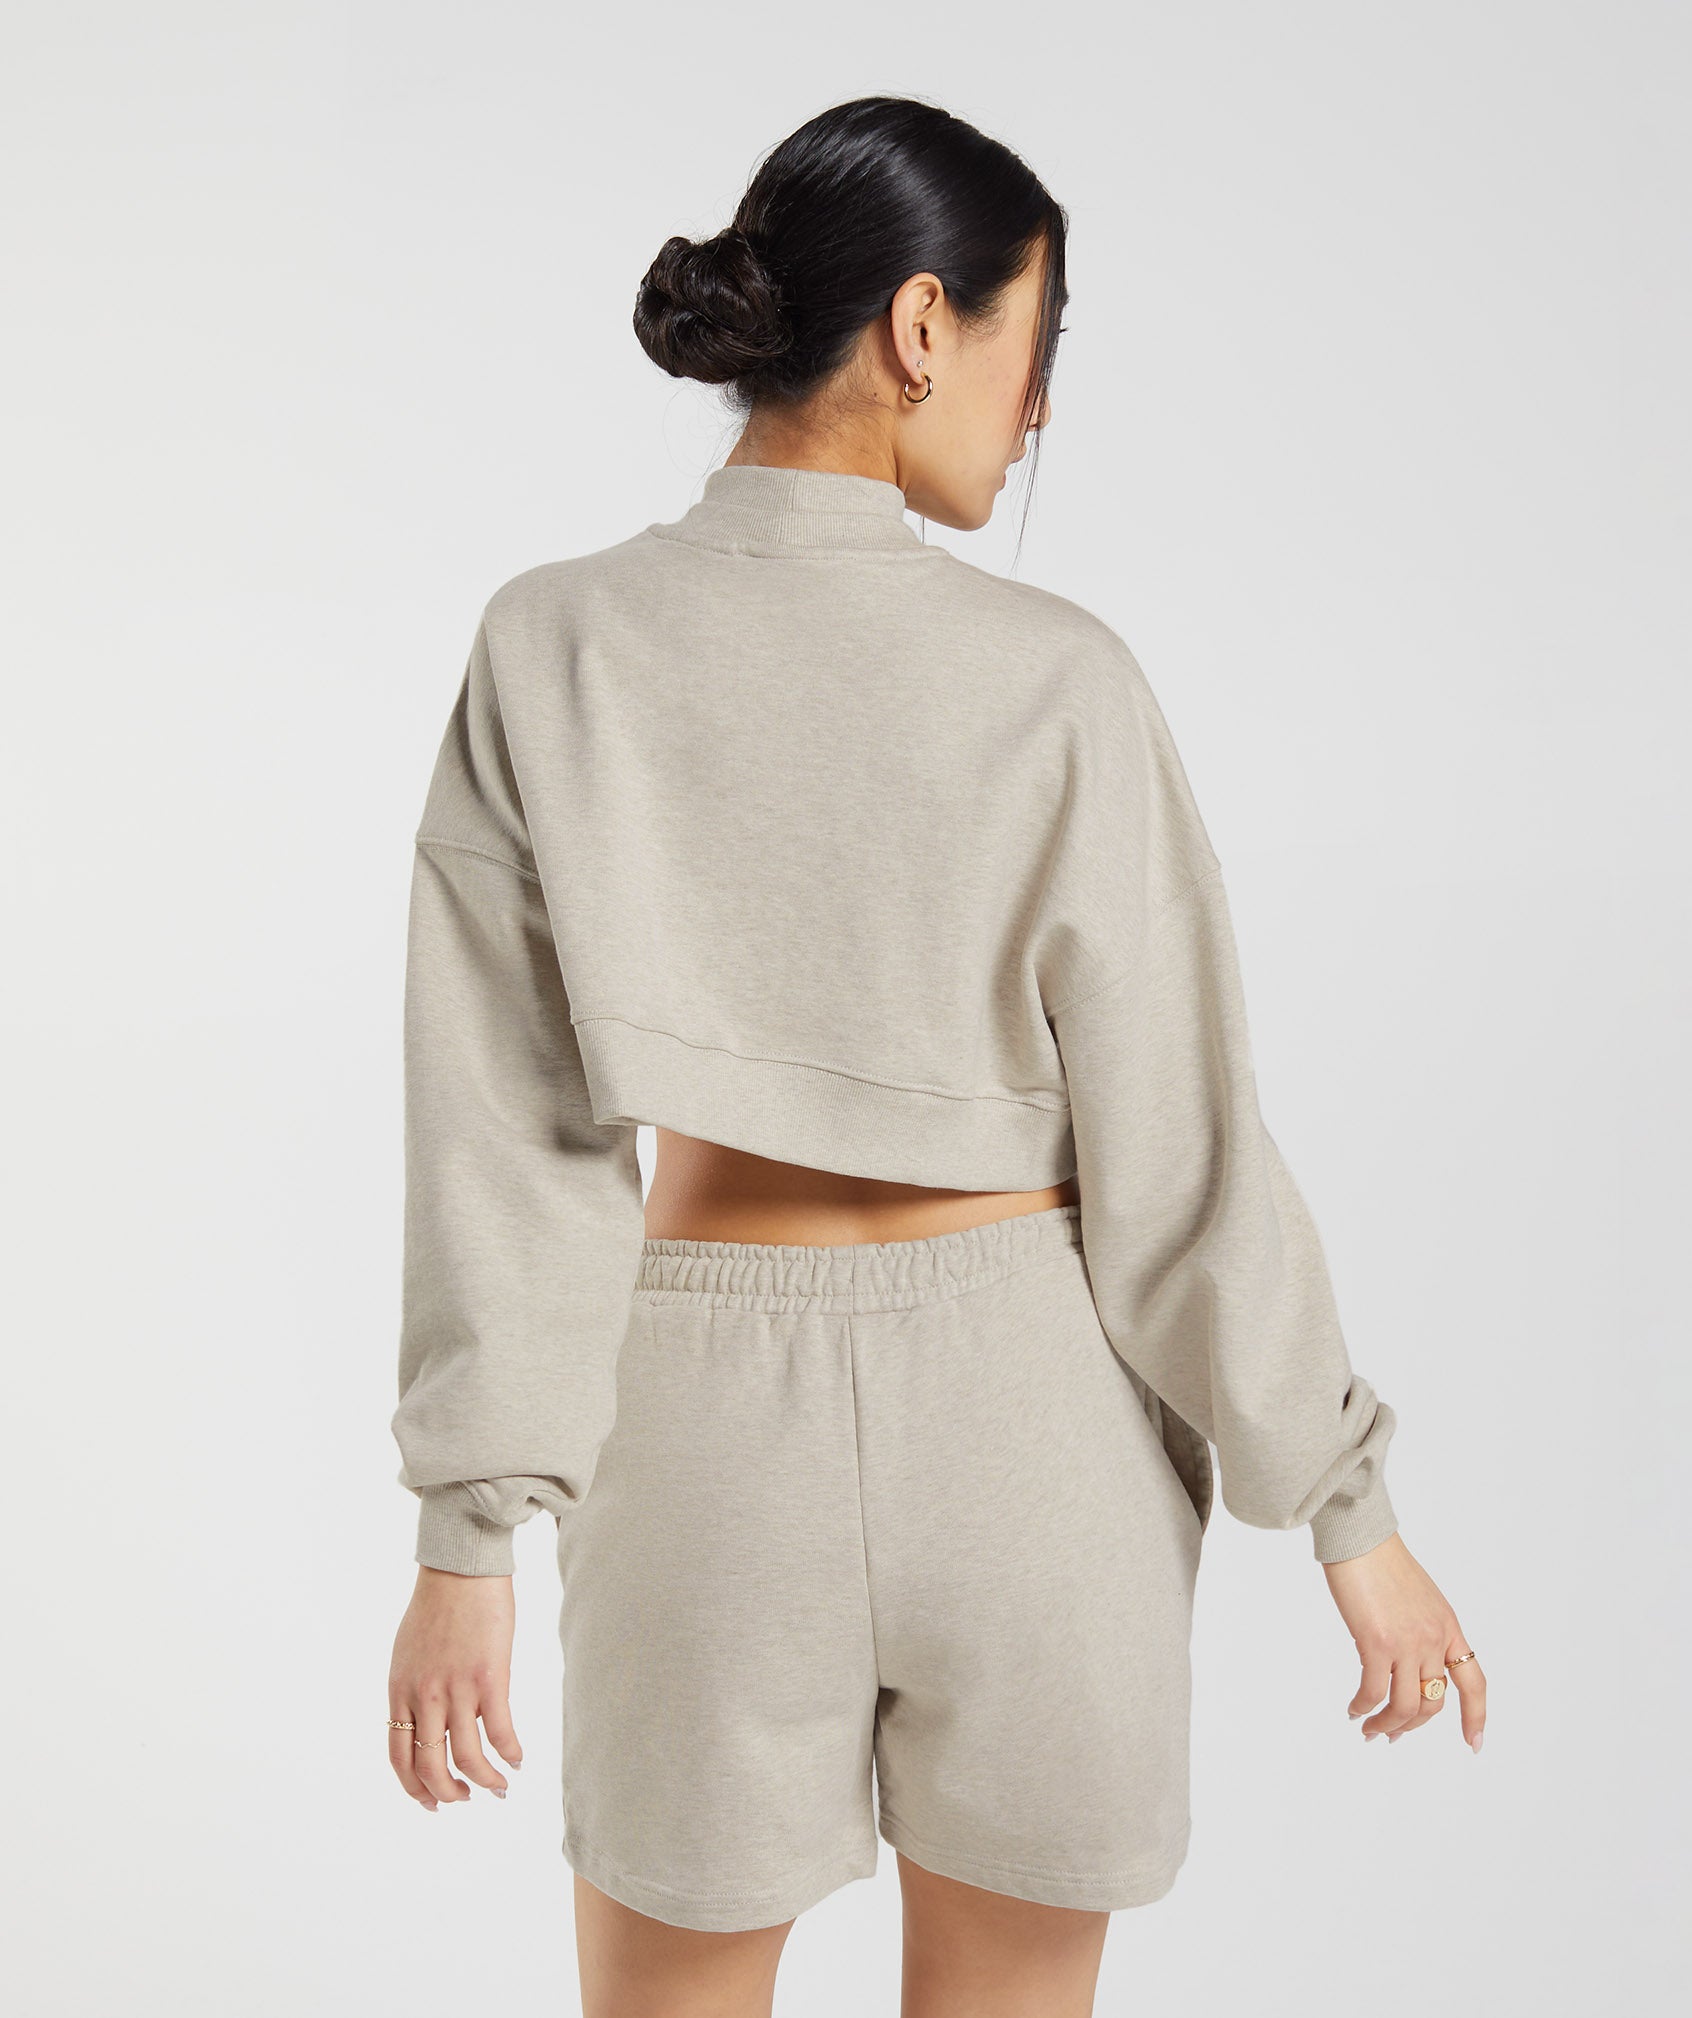 Rest Day Sweats Cropped Pullover in Sand Marl - view 3